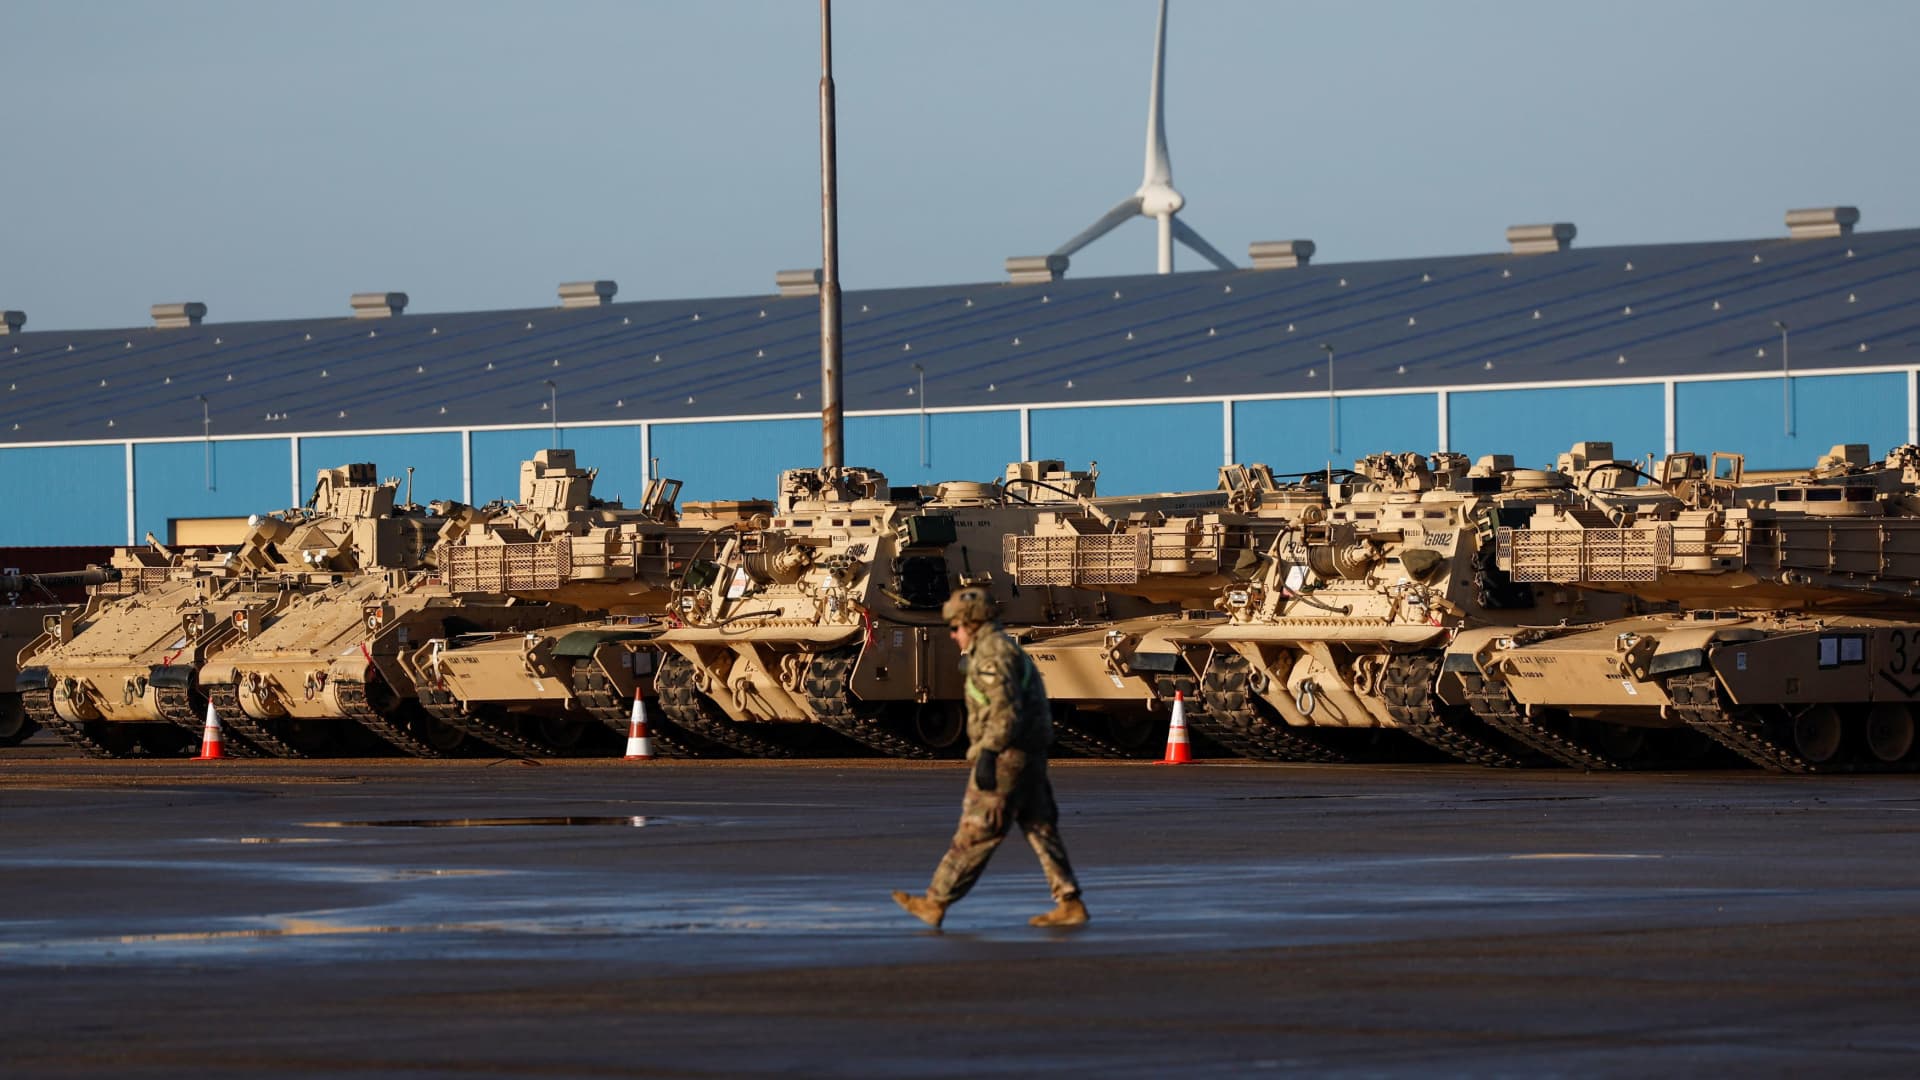 U.S. army vehicles including tanks are brought ashore in the Netherlands as a military unit is transported to Poland and Lithuania as part of a NATO mission to reinforce the alliance's eastern flank after the Russian invasion of Ukraine, in Vlissingen, Netherlands January 11, 2023.